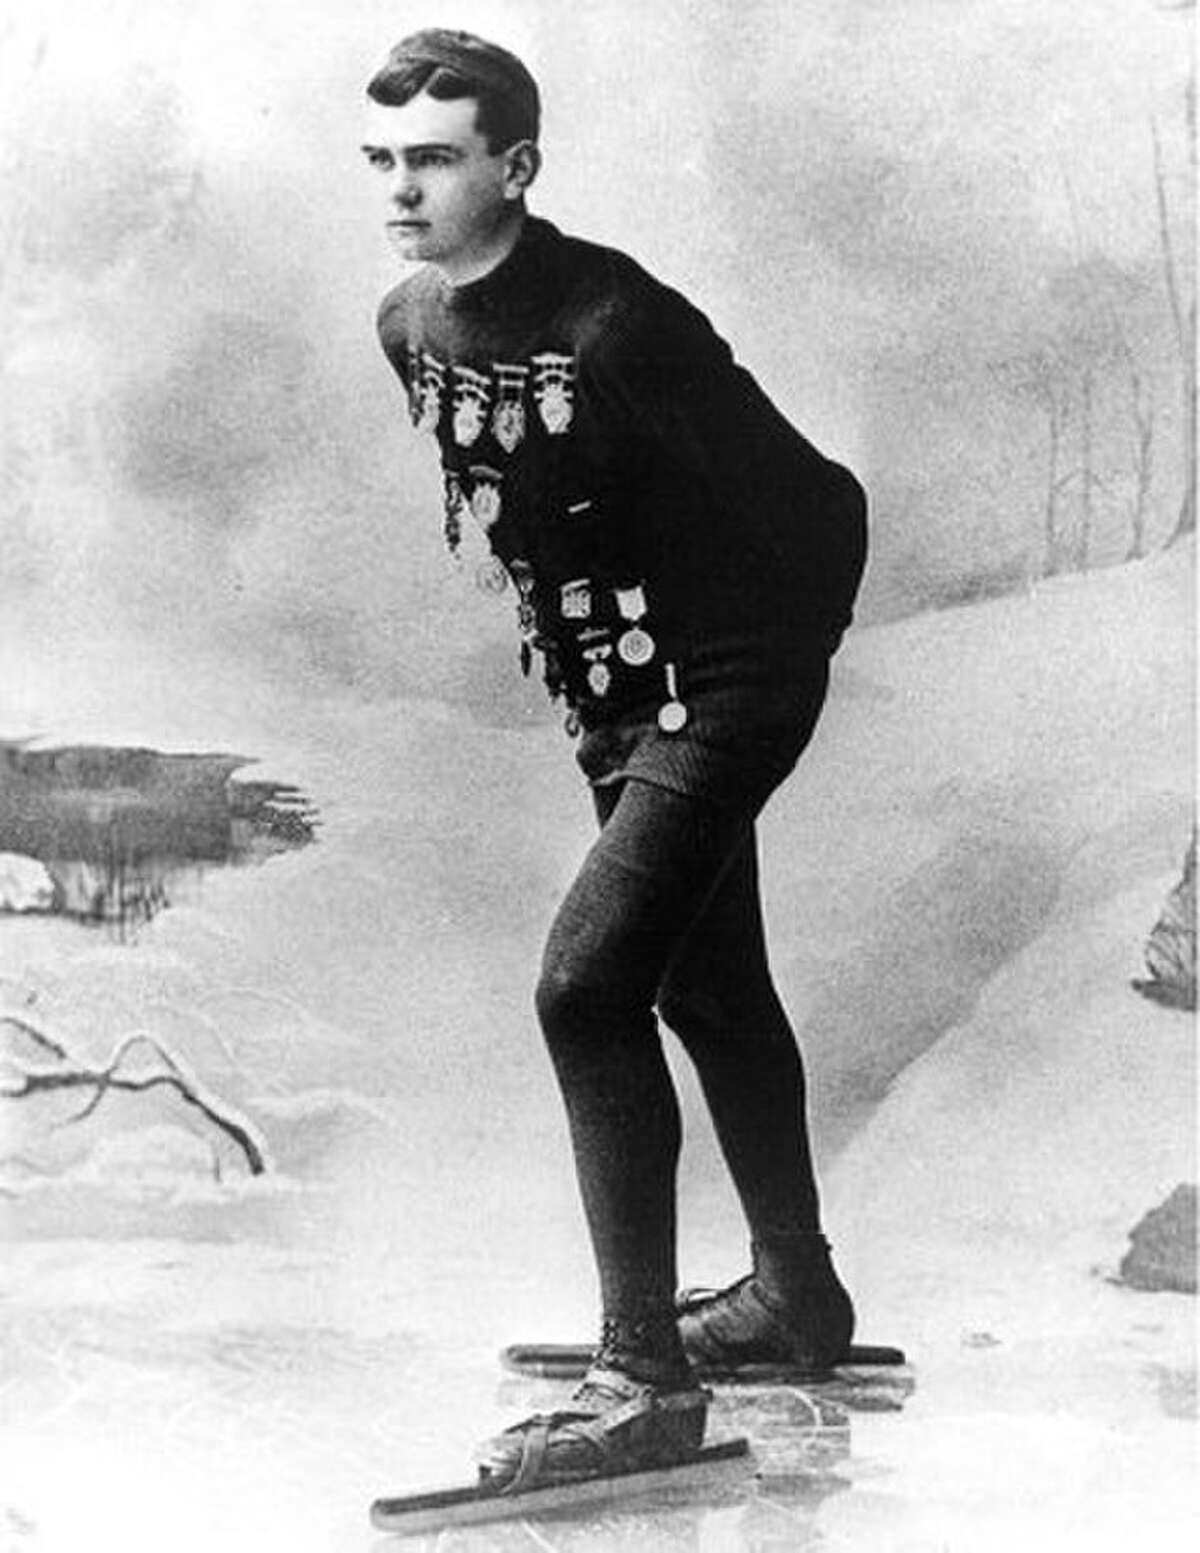 The decorated Joseph Donoghue, part of a speedskating family from Newburgh, was known for skating with longer irons than those used by other skaters in the late 1800s. That equipment innovation came courtesy of his father and helped Donoghue become world champion.